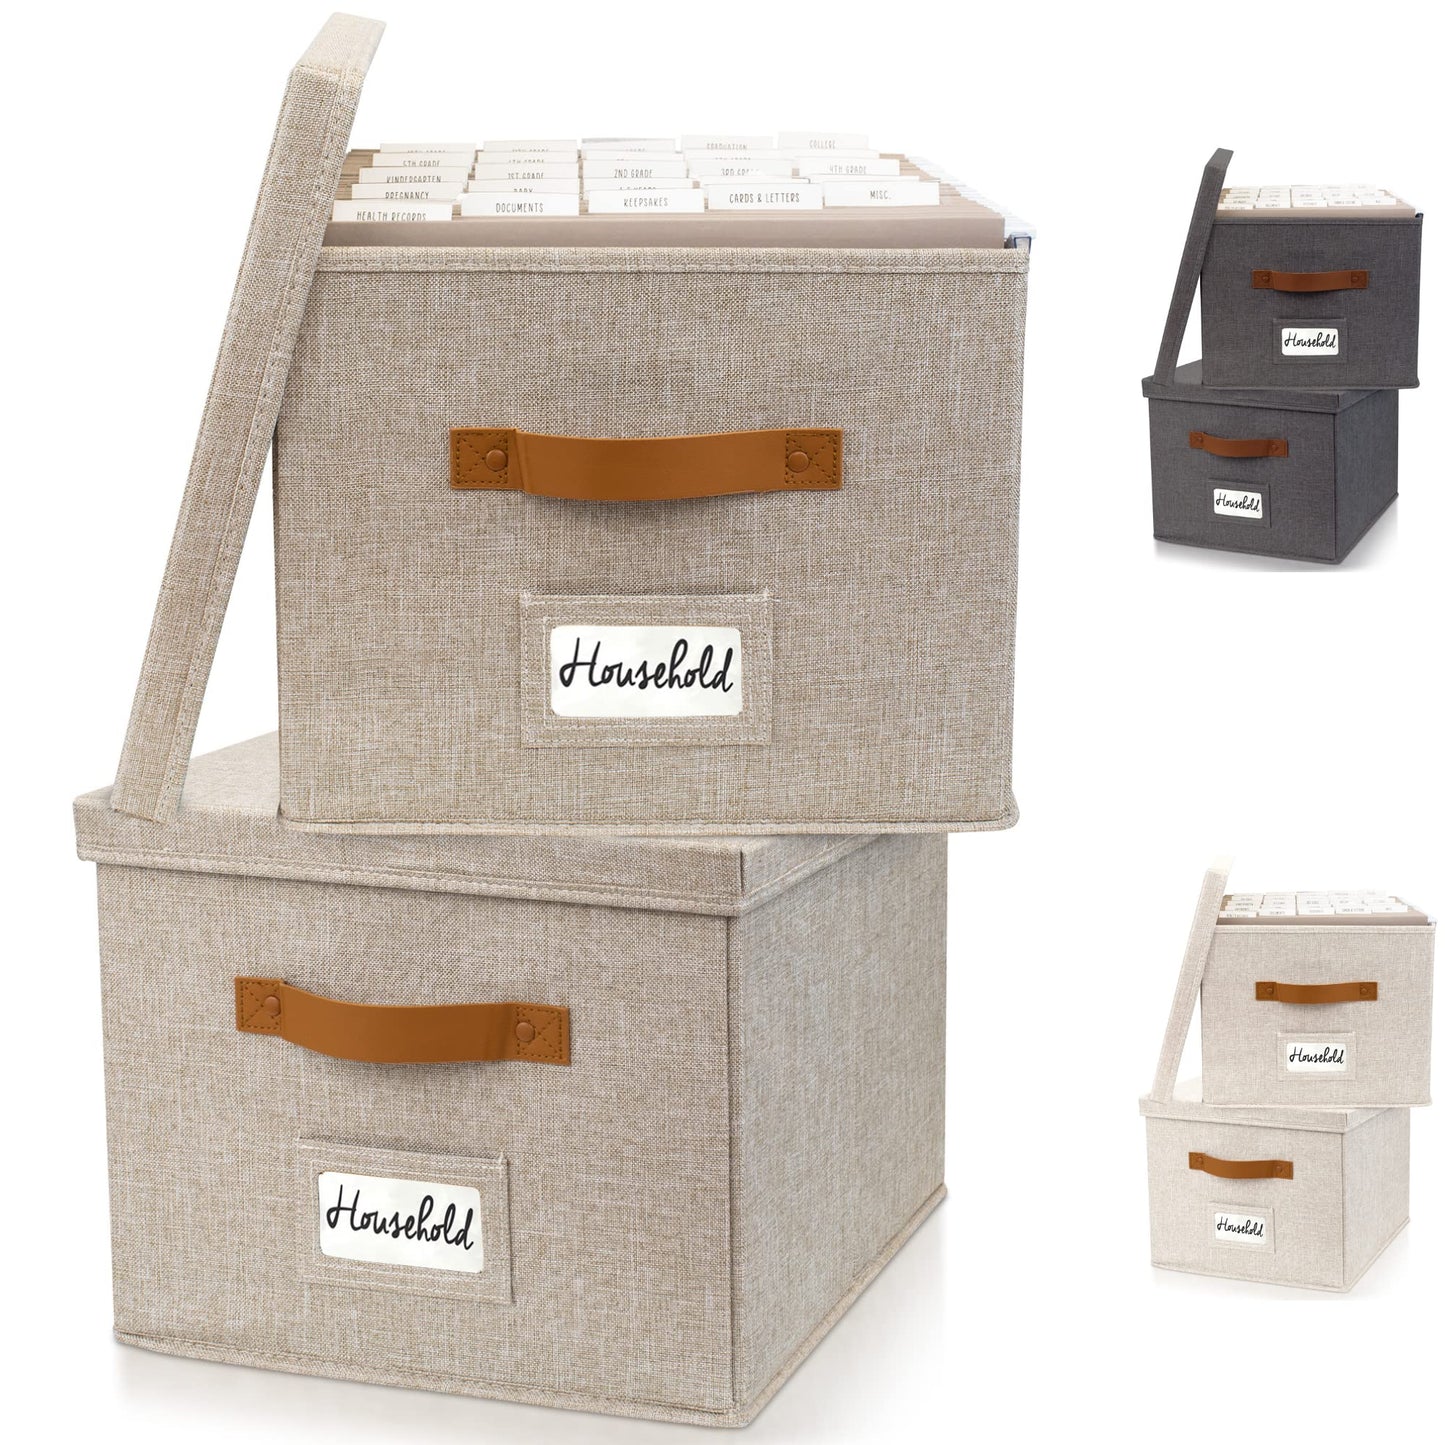 ZICOTO Decorative File Organizer Box Set of 2 - Collapsible Linen Filing Cabinets w/Handles Are Perfect to Store all Your Documents & Hanging File Folders - Portable Easy Slide File Crates with Lid